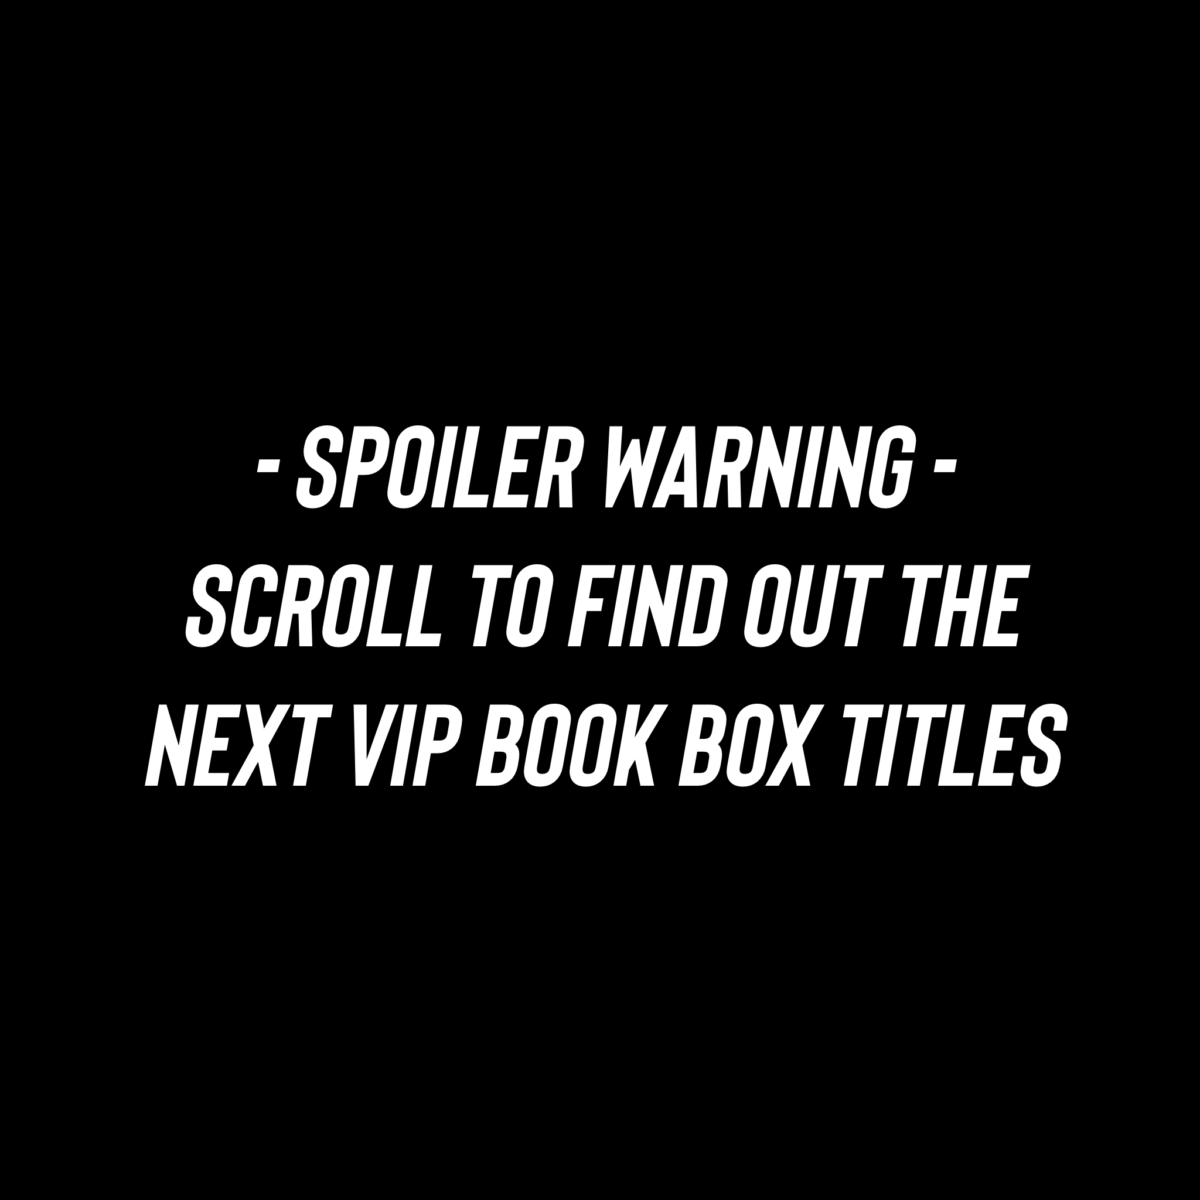 VIP Book Boxes – contains spoilers!